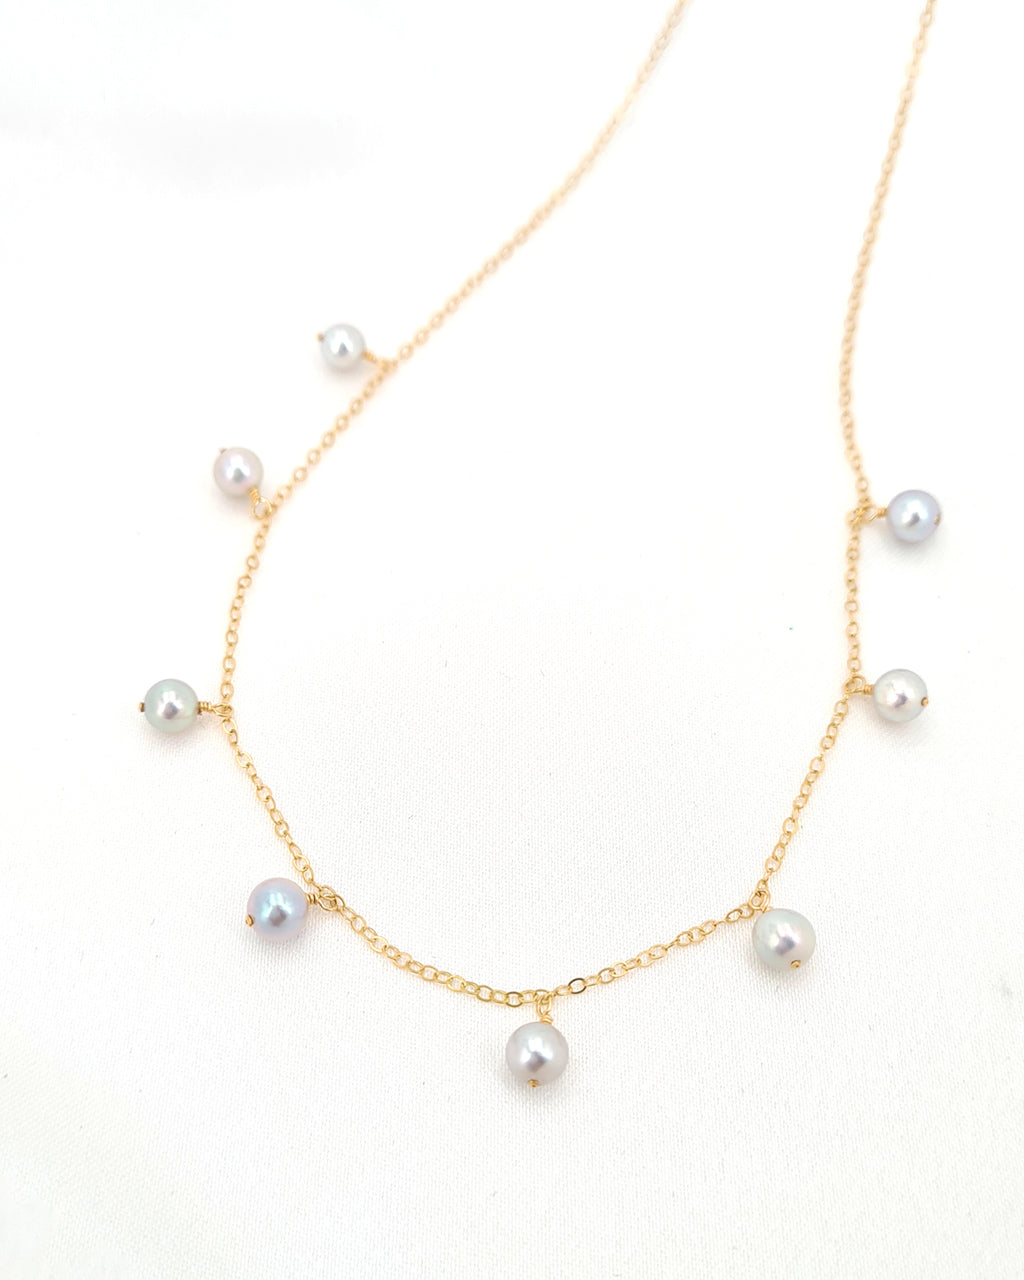 Saltwater Silver Blue Akoya Pearl Floating Station Necklace | Layering Necklace | Something Blue for Timeless Brides